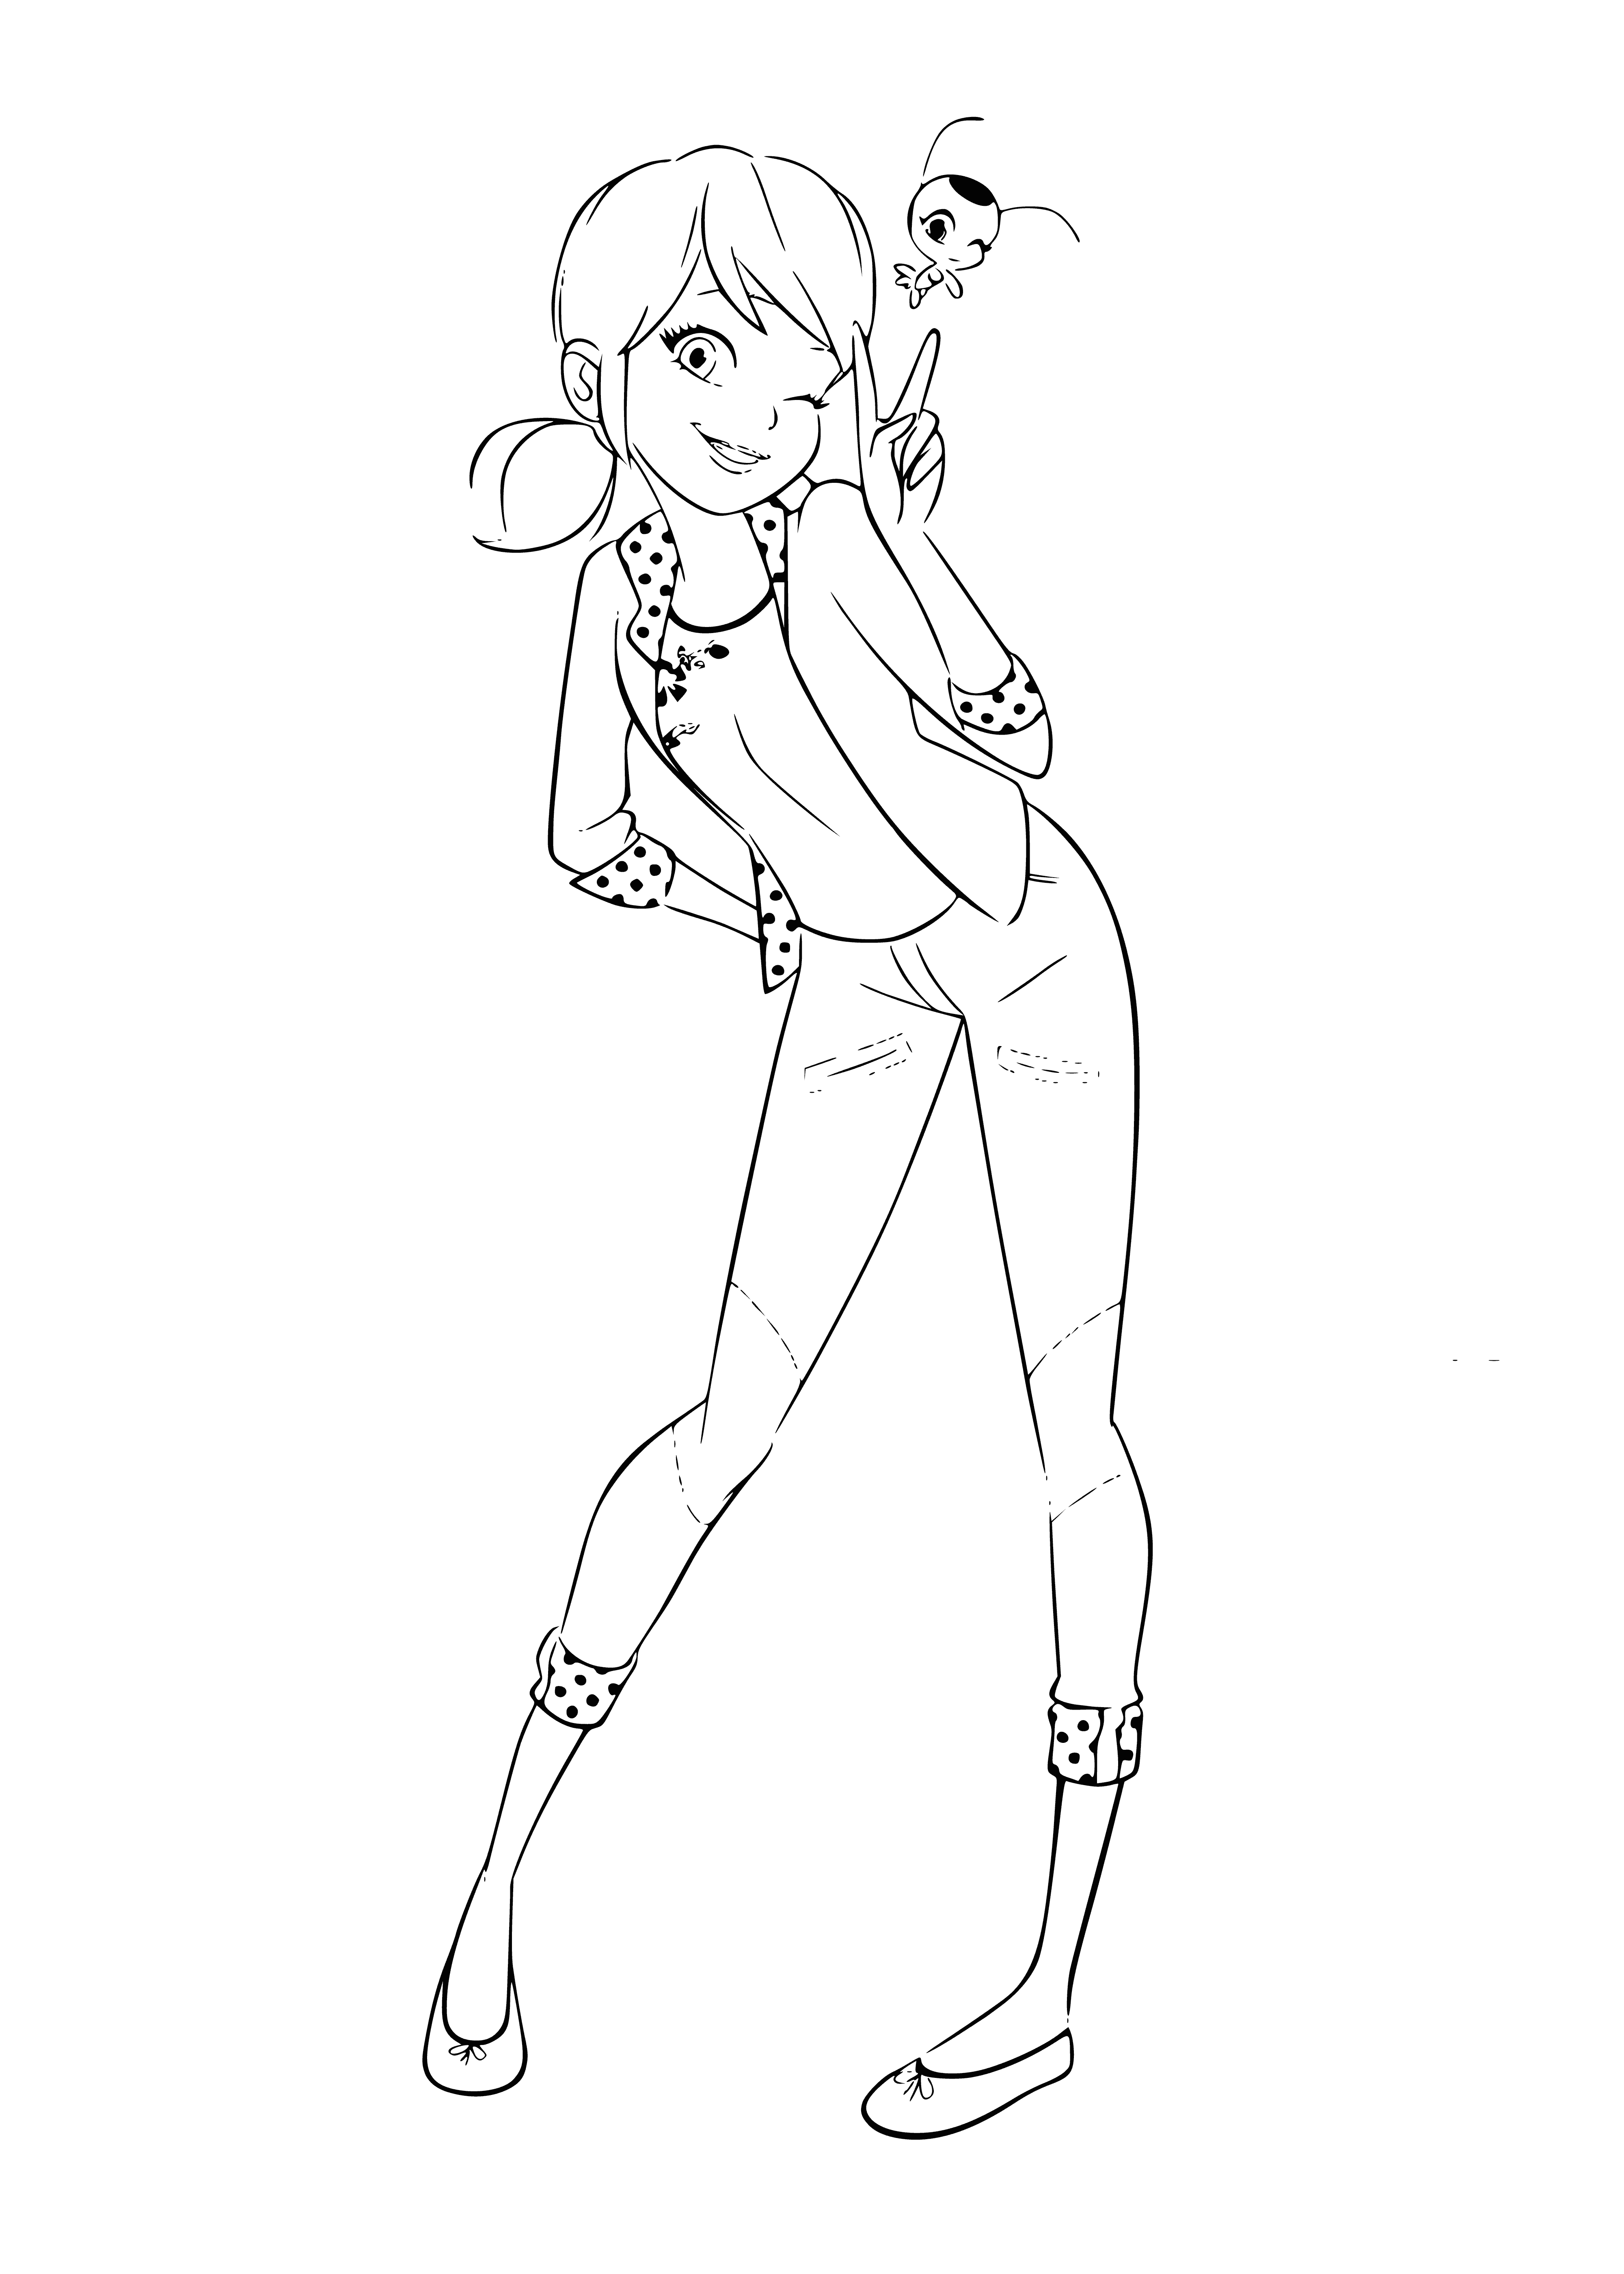 Tikki And Marinette coloring page